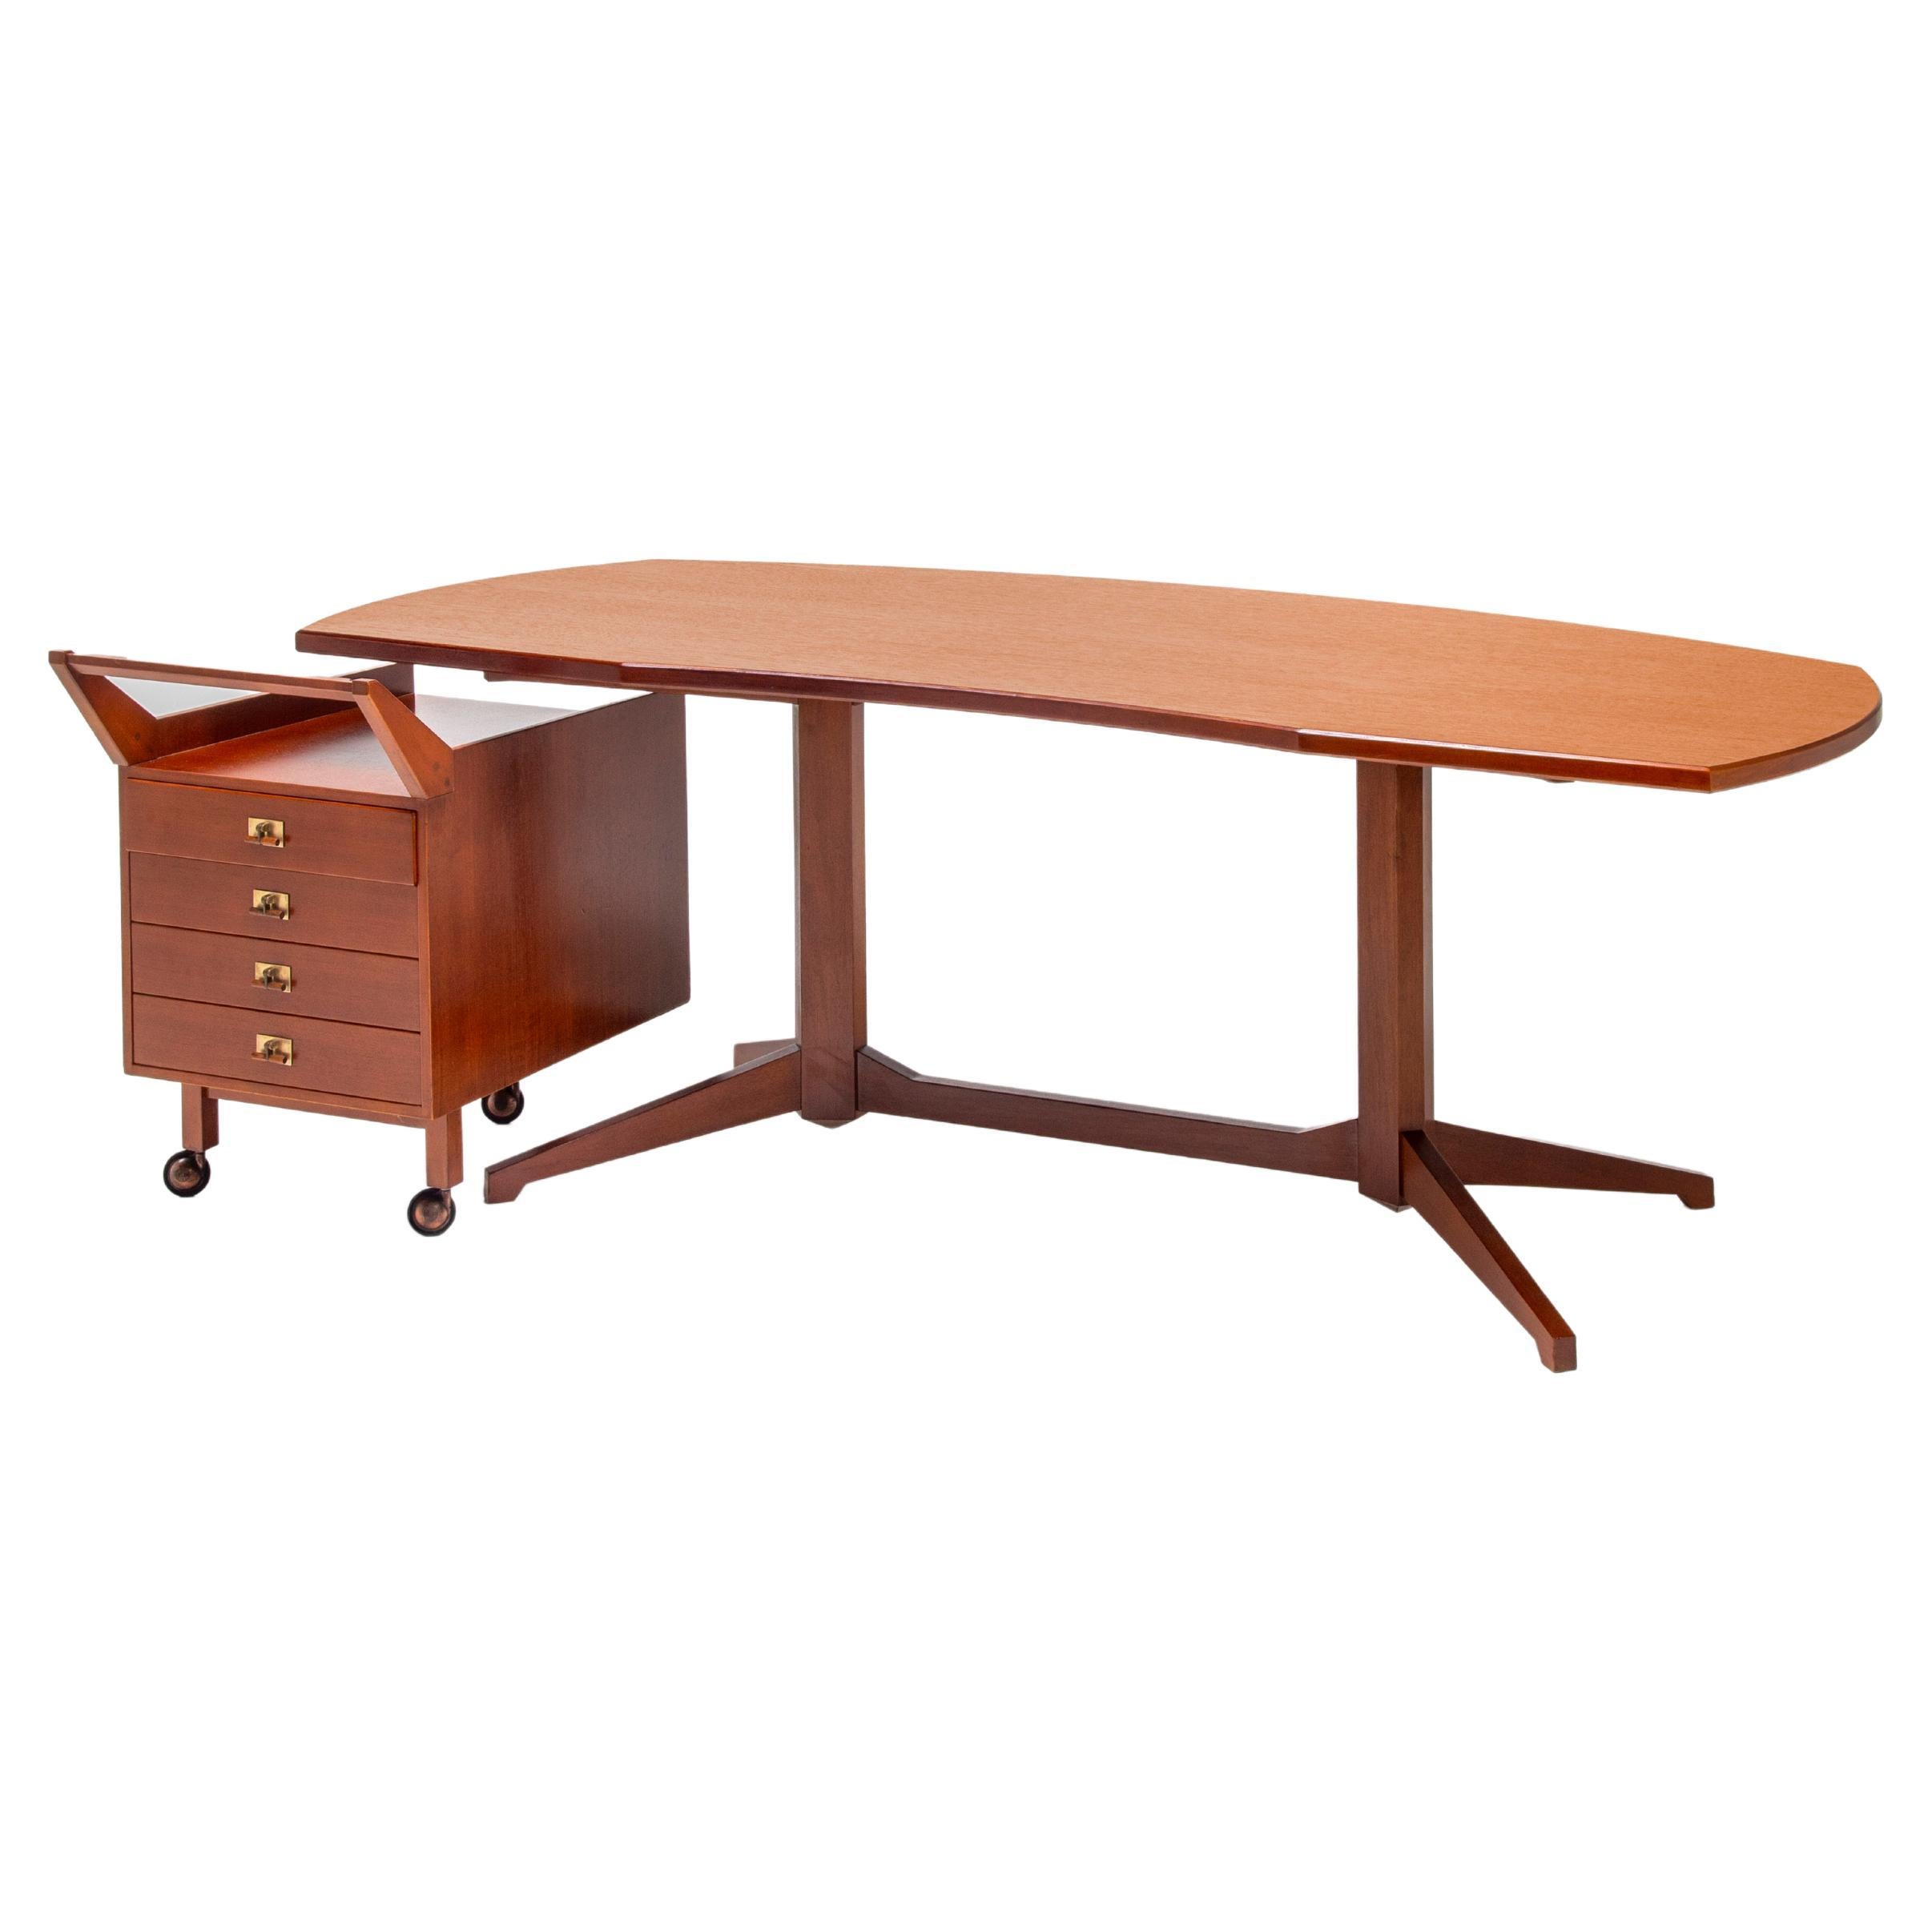 Franco Albini desk with mobile chest of drawers mod. T22, Italian Design  1950s